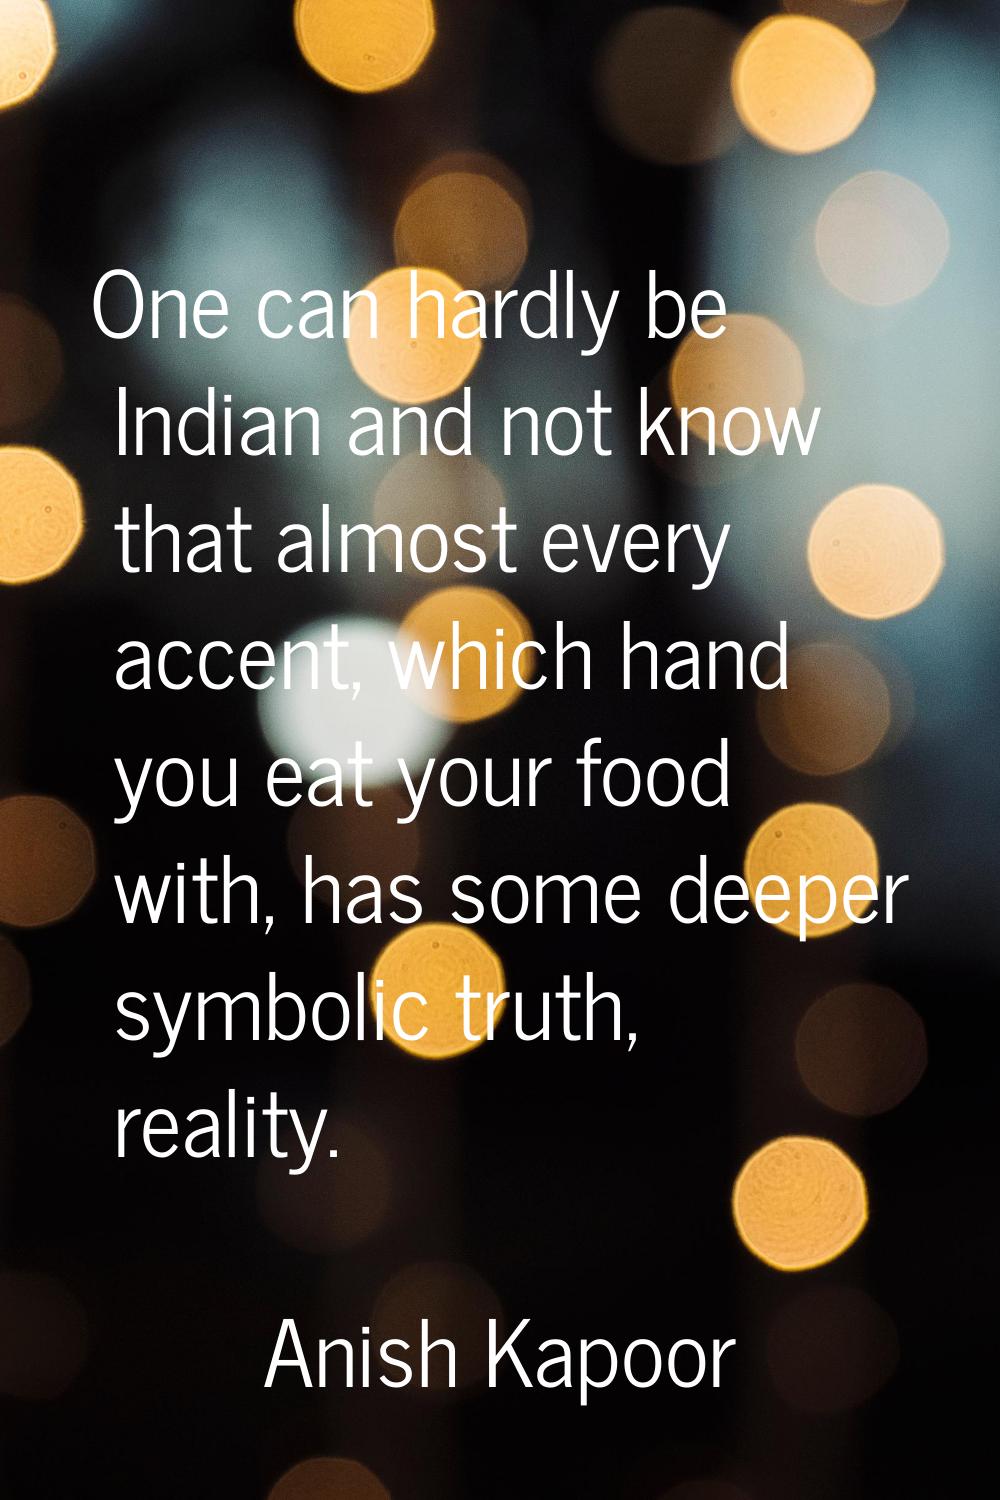 One can hardly be Indian and not know that almost every accent, which hand you eat your food with, 